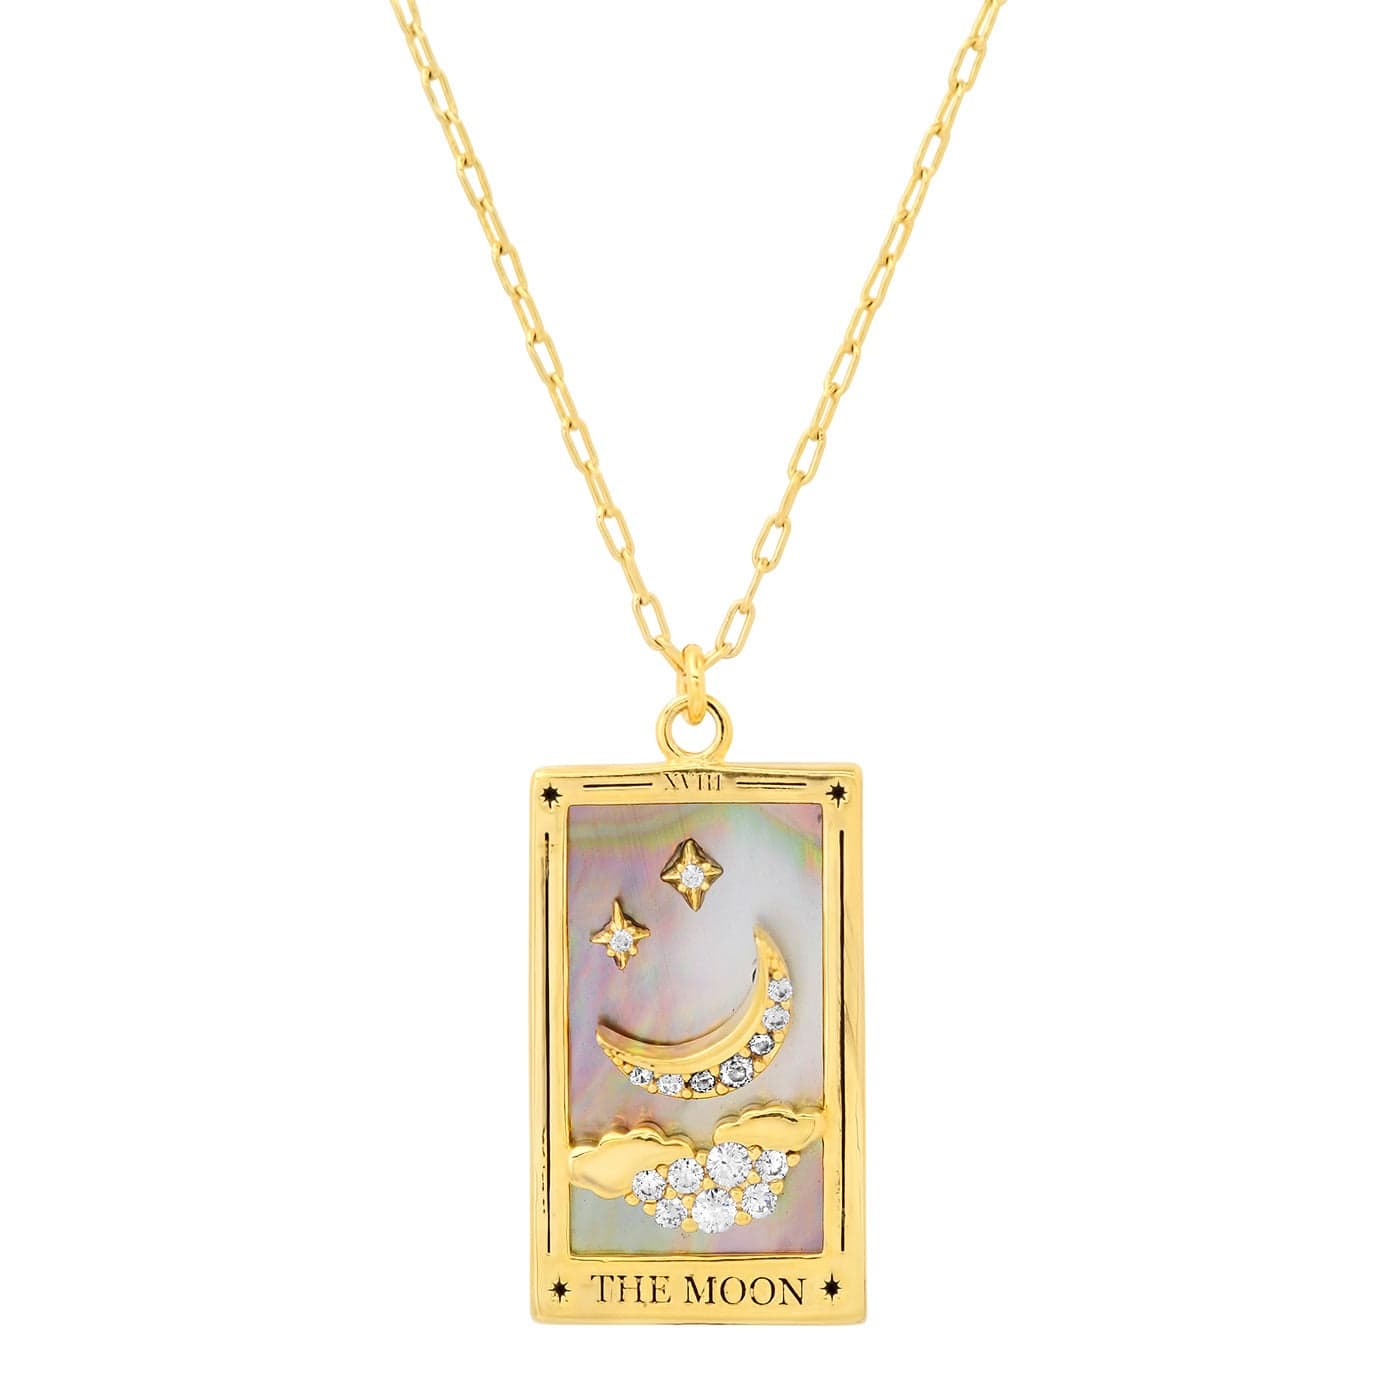 TAI JEWELRY Necklace The Moon Tarot Card Necklace